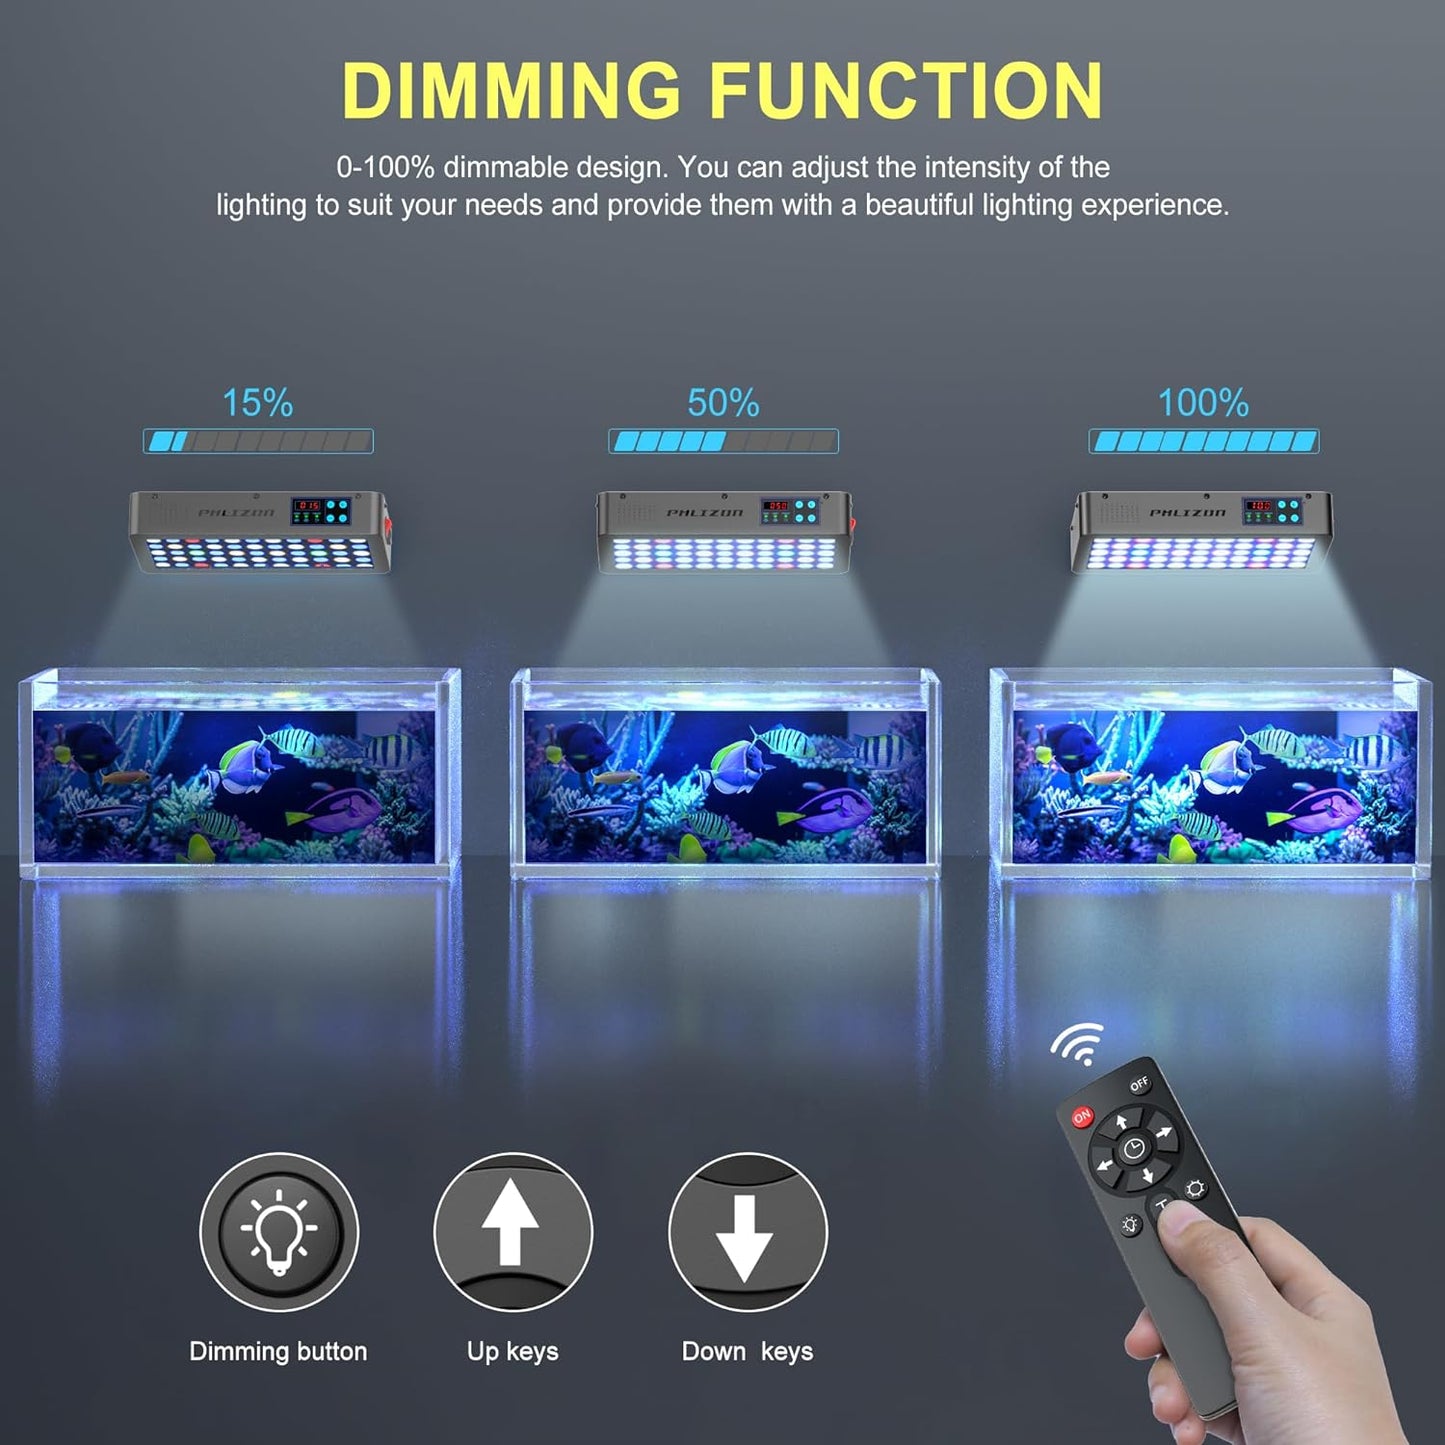 Phlizon Timer Control Dimmable 165W LED Aquarium Light with Temperature Monitor Full Spectrum Fish Tank Light for Grow Coral Reef Marine Fish Tank LPS/SPS